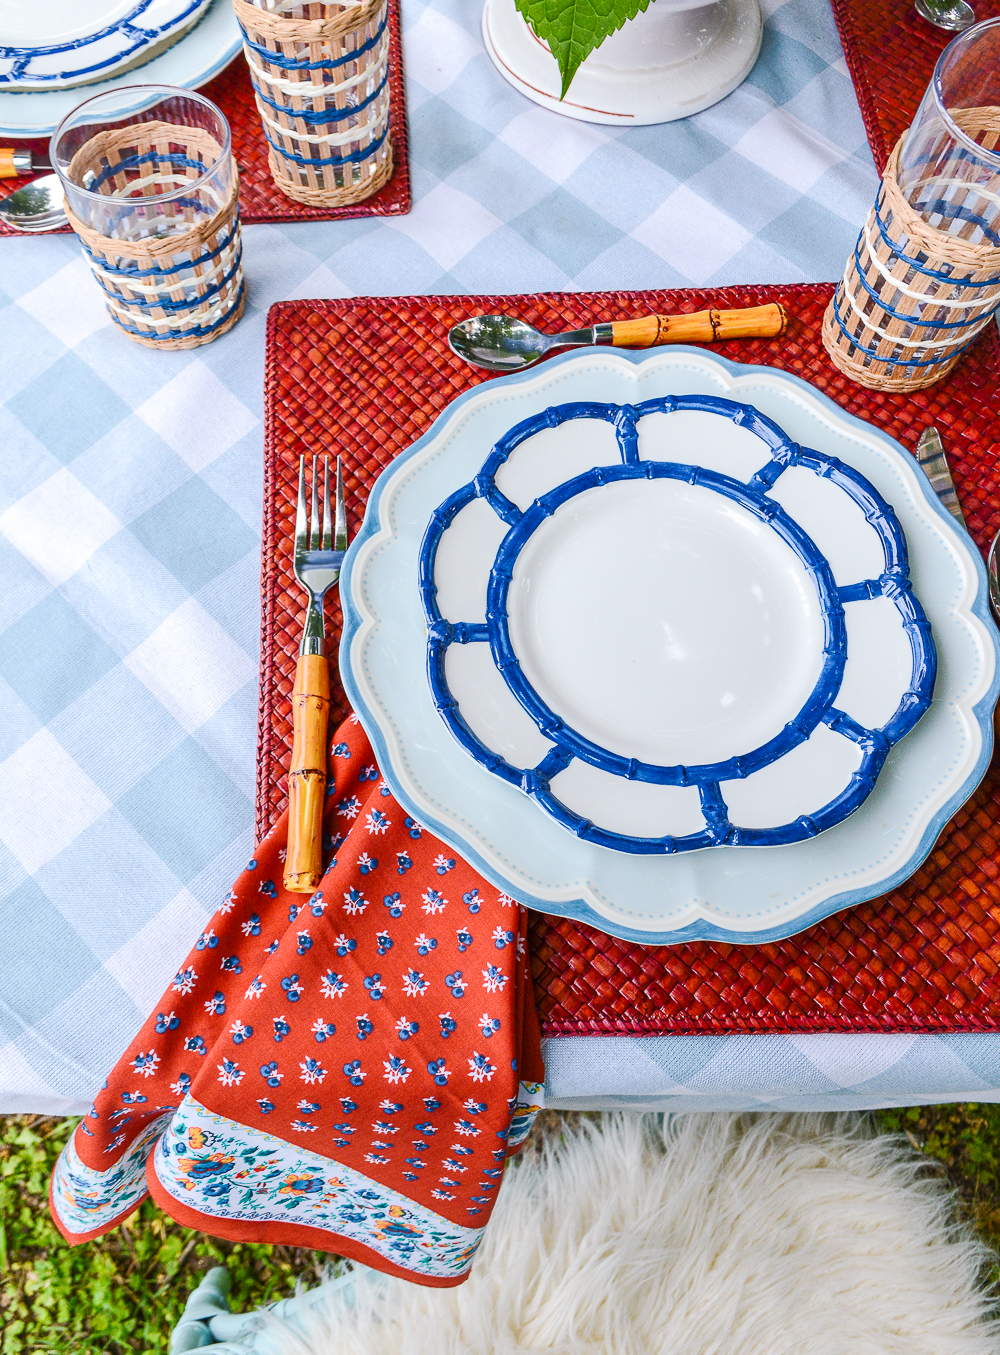 Blue bamboo melamine salad plates with Lenox Provencal dinner plates on top of a red woven placemat and blue gingham tablecloth